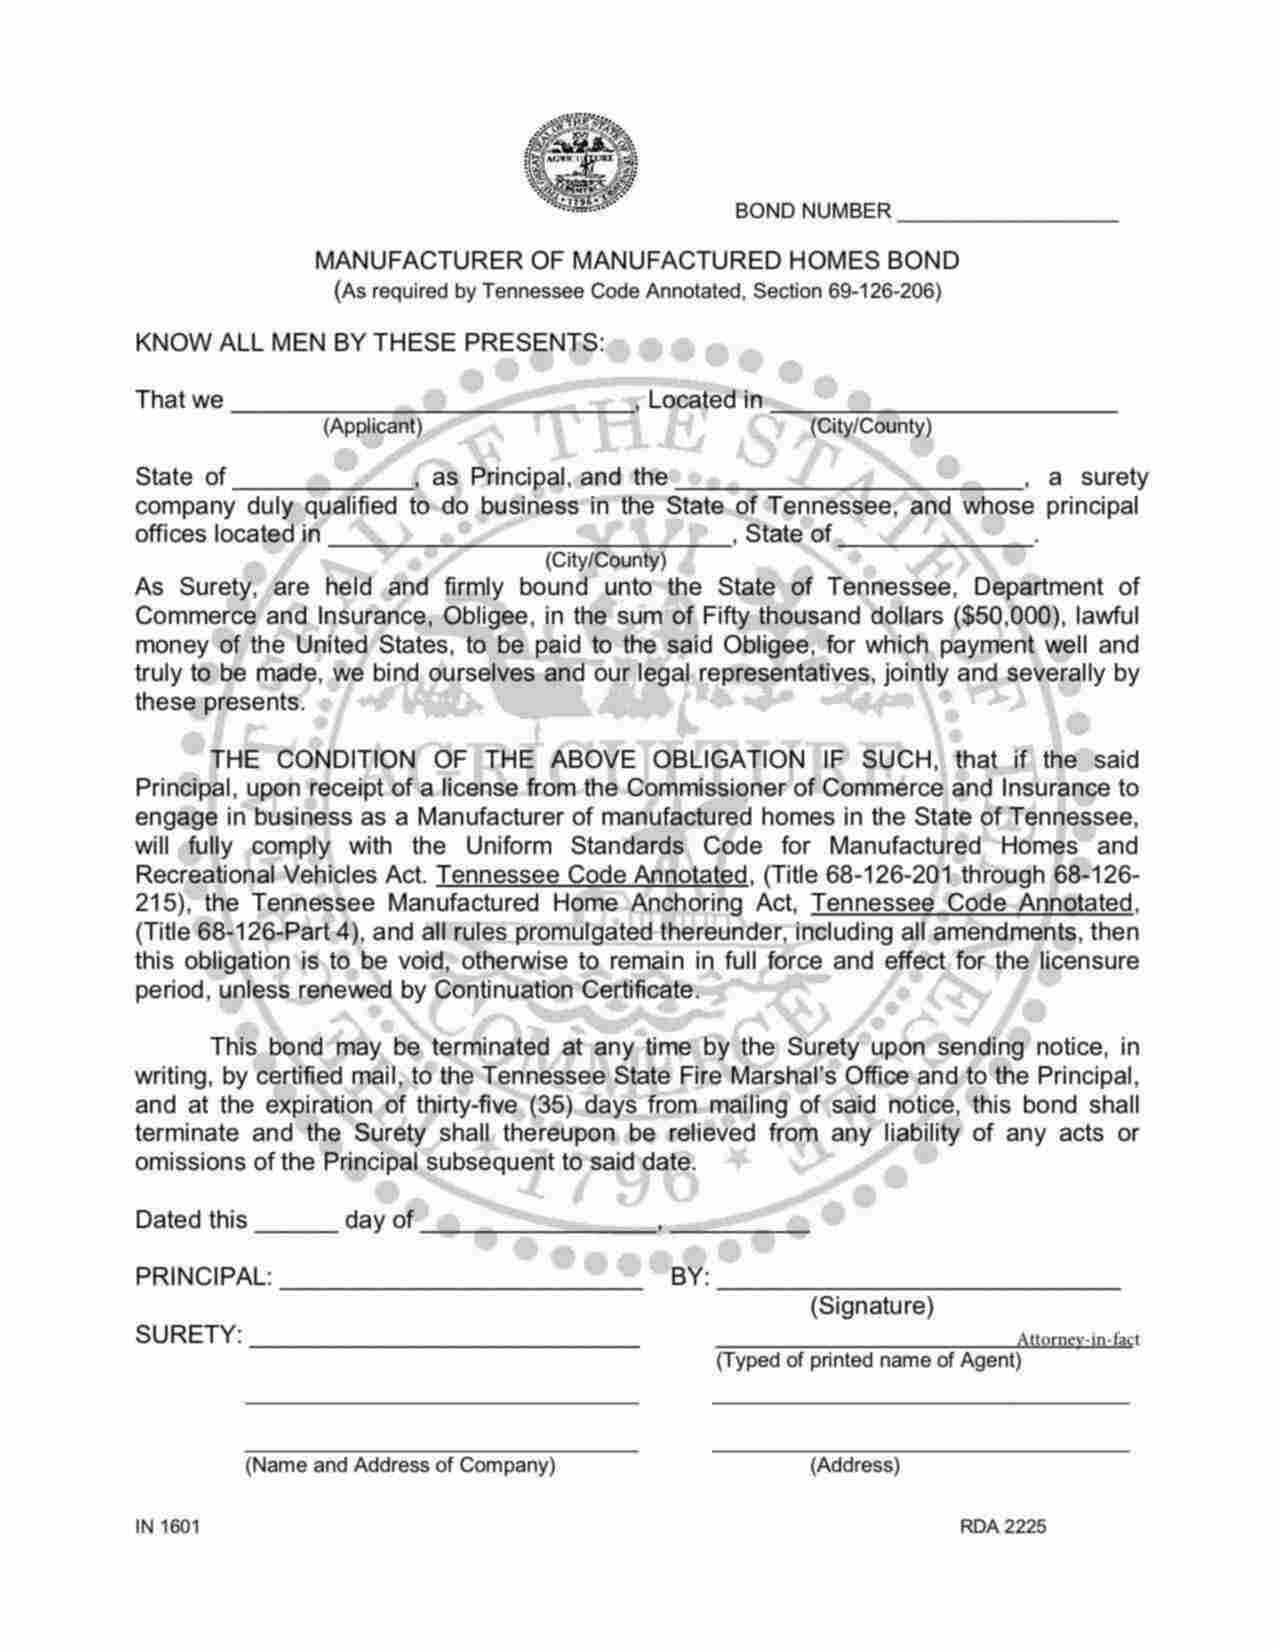 Tennessee Manufacturer of Manufactured Homes Bond Form